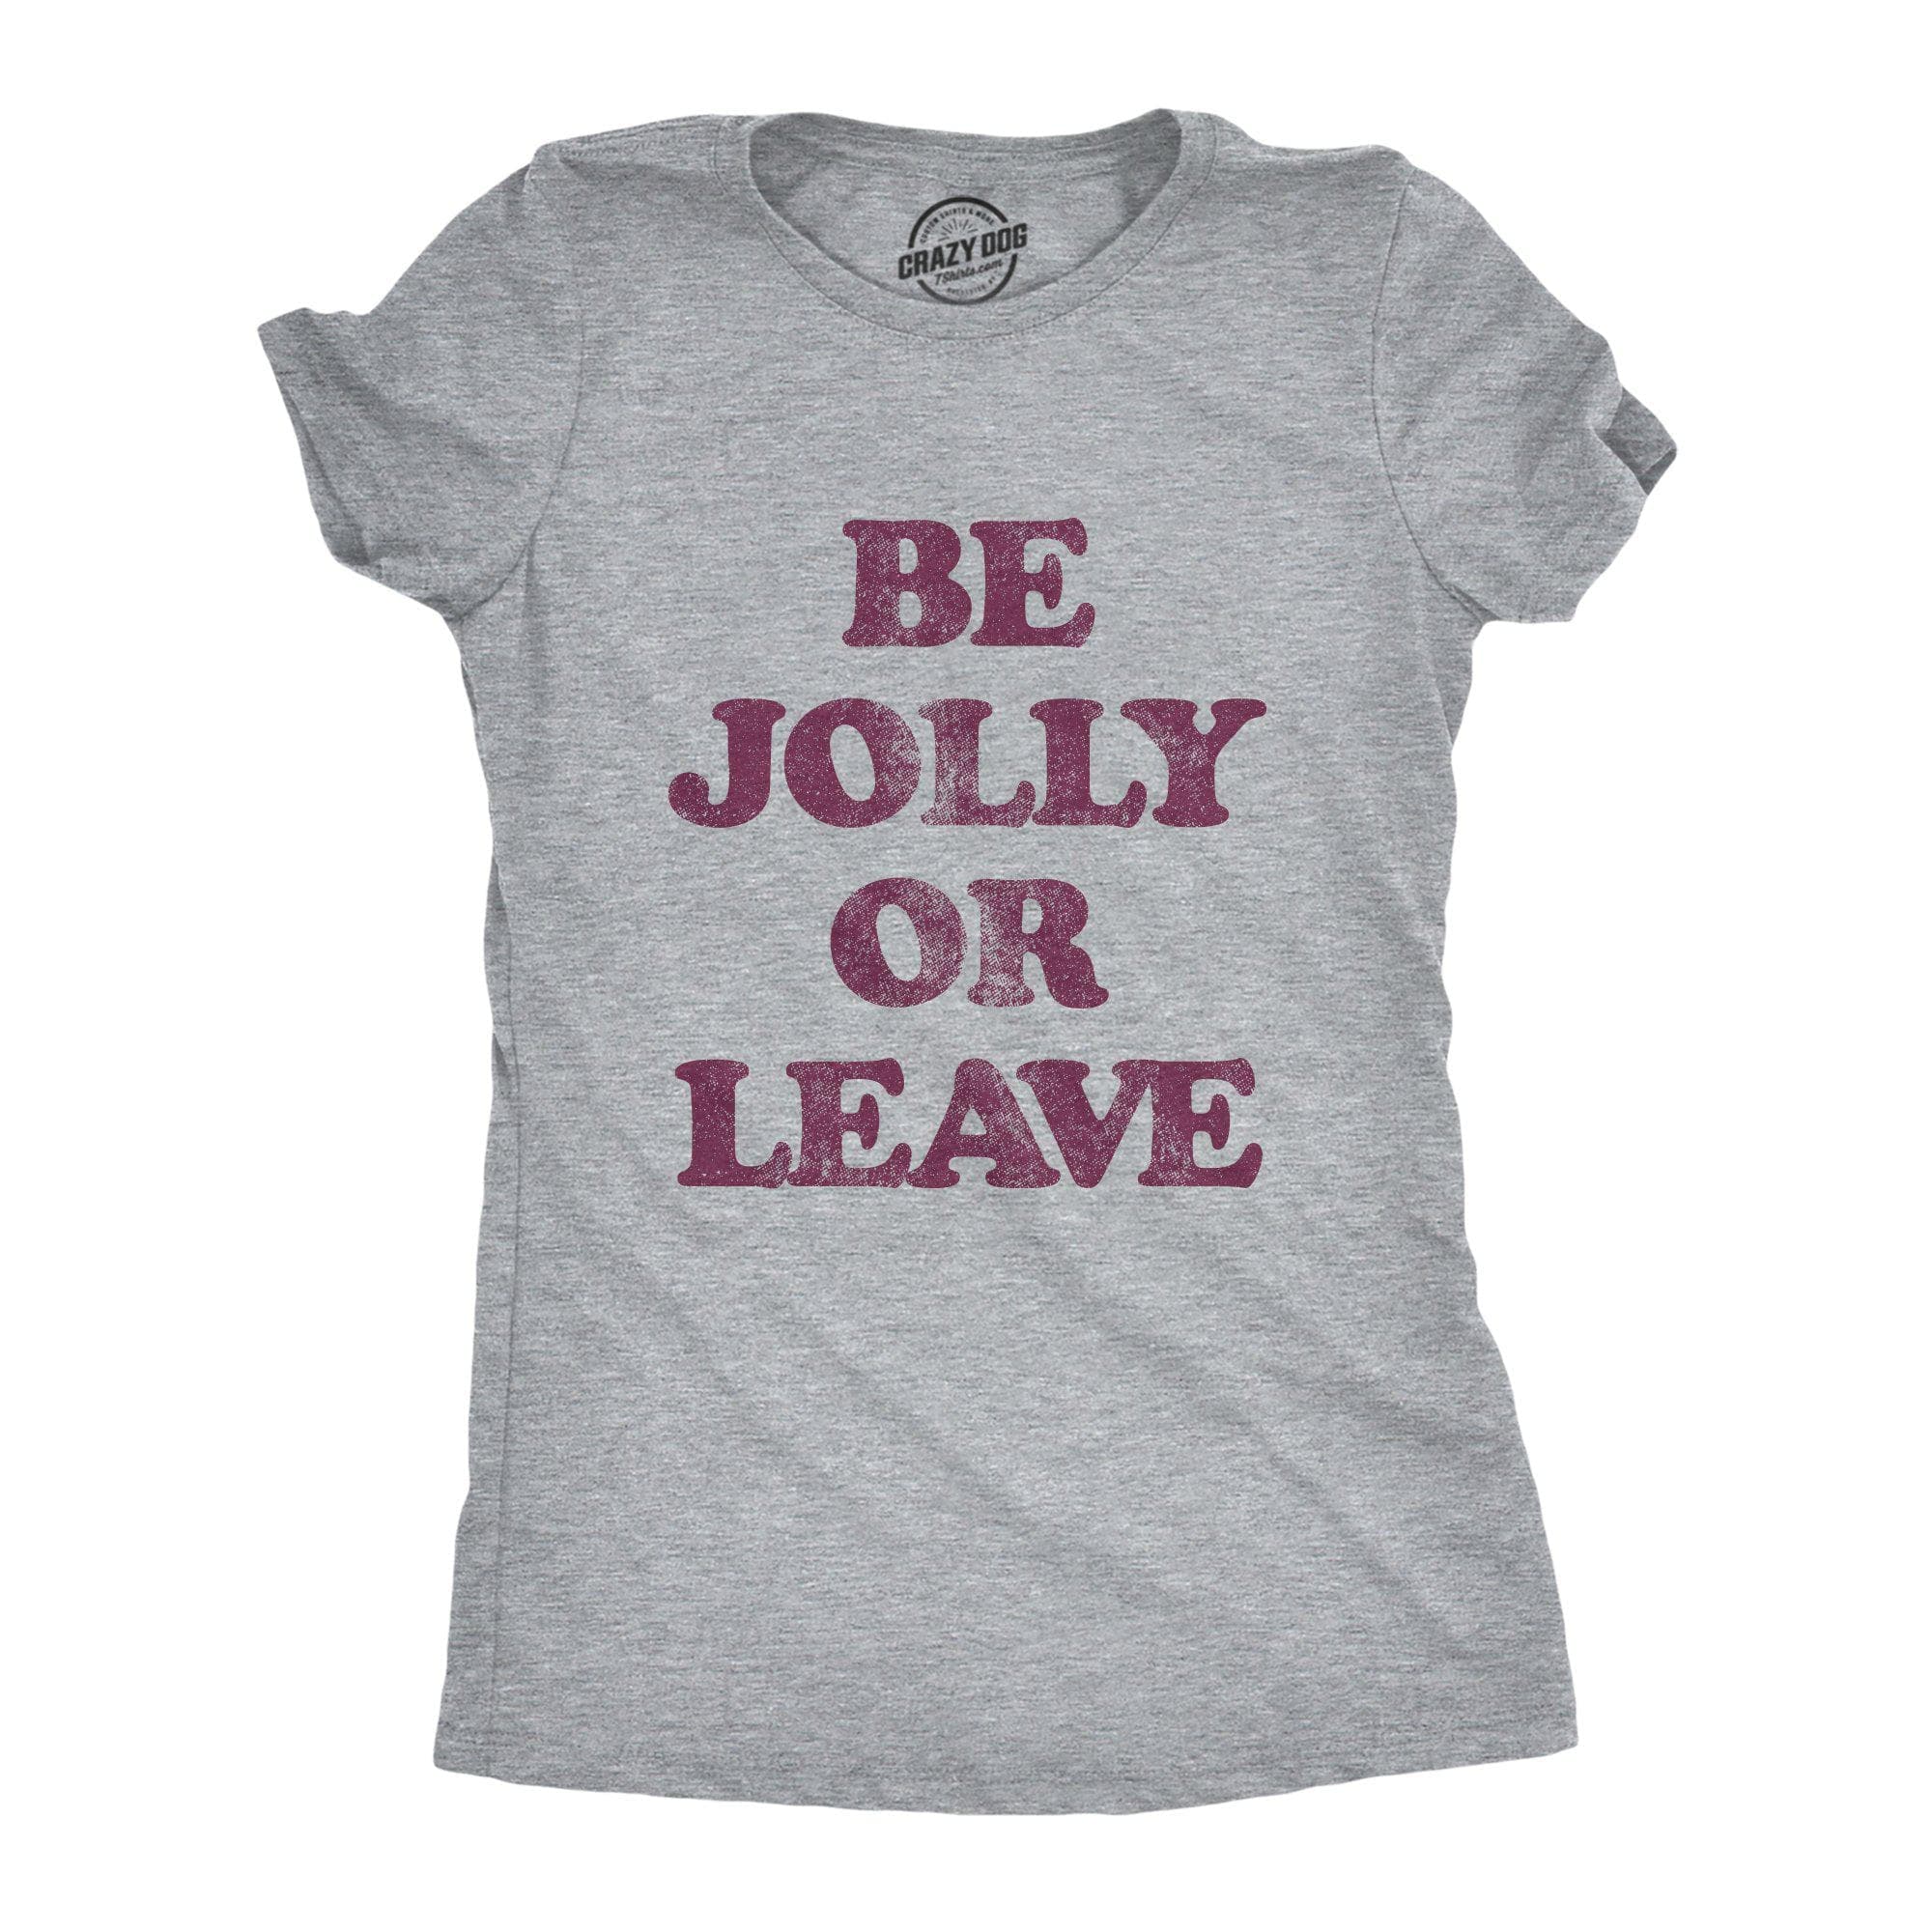 Be Jolly Or Leave Women's Tshirt - Crazy Dog T-Shirts